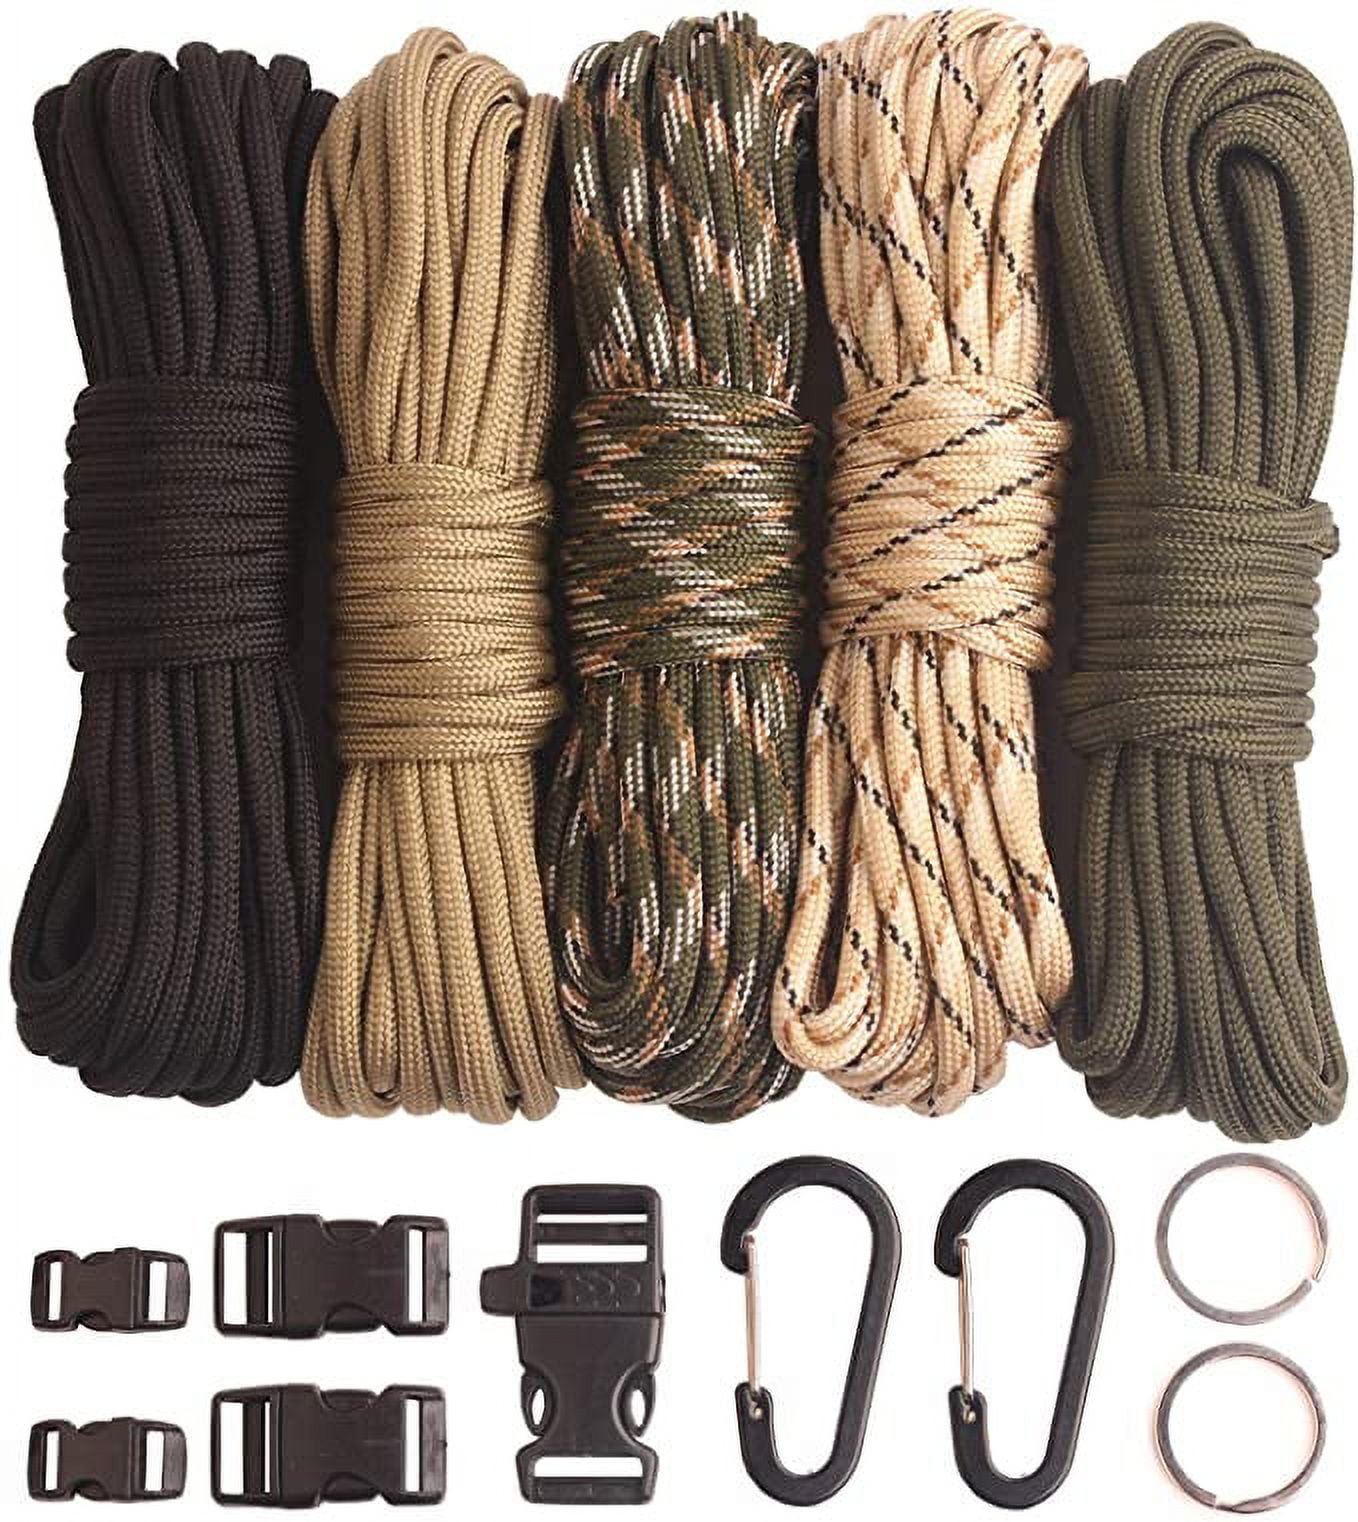 GeGeDa Paracord,Paracord 550 Combo Crafting Kits with 5 Types